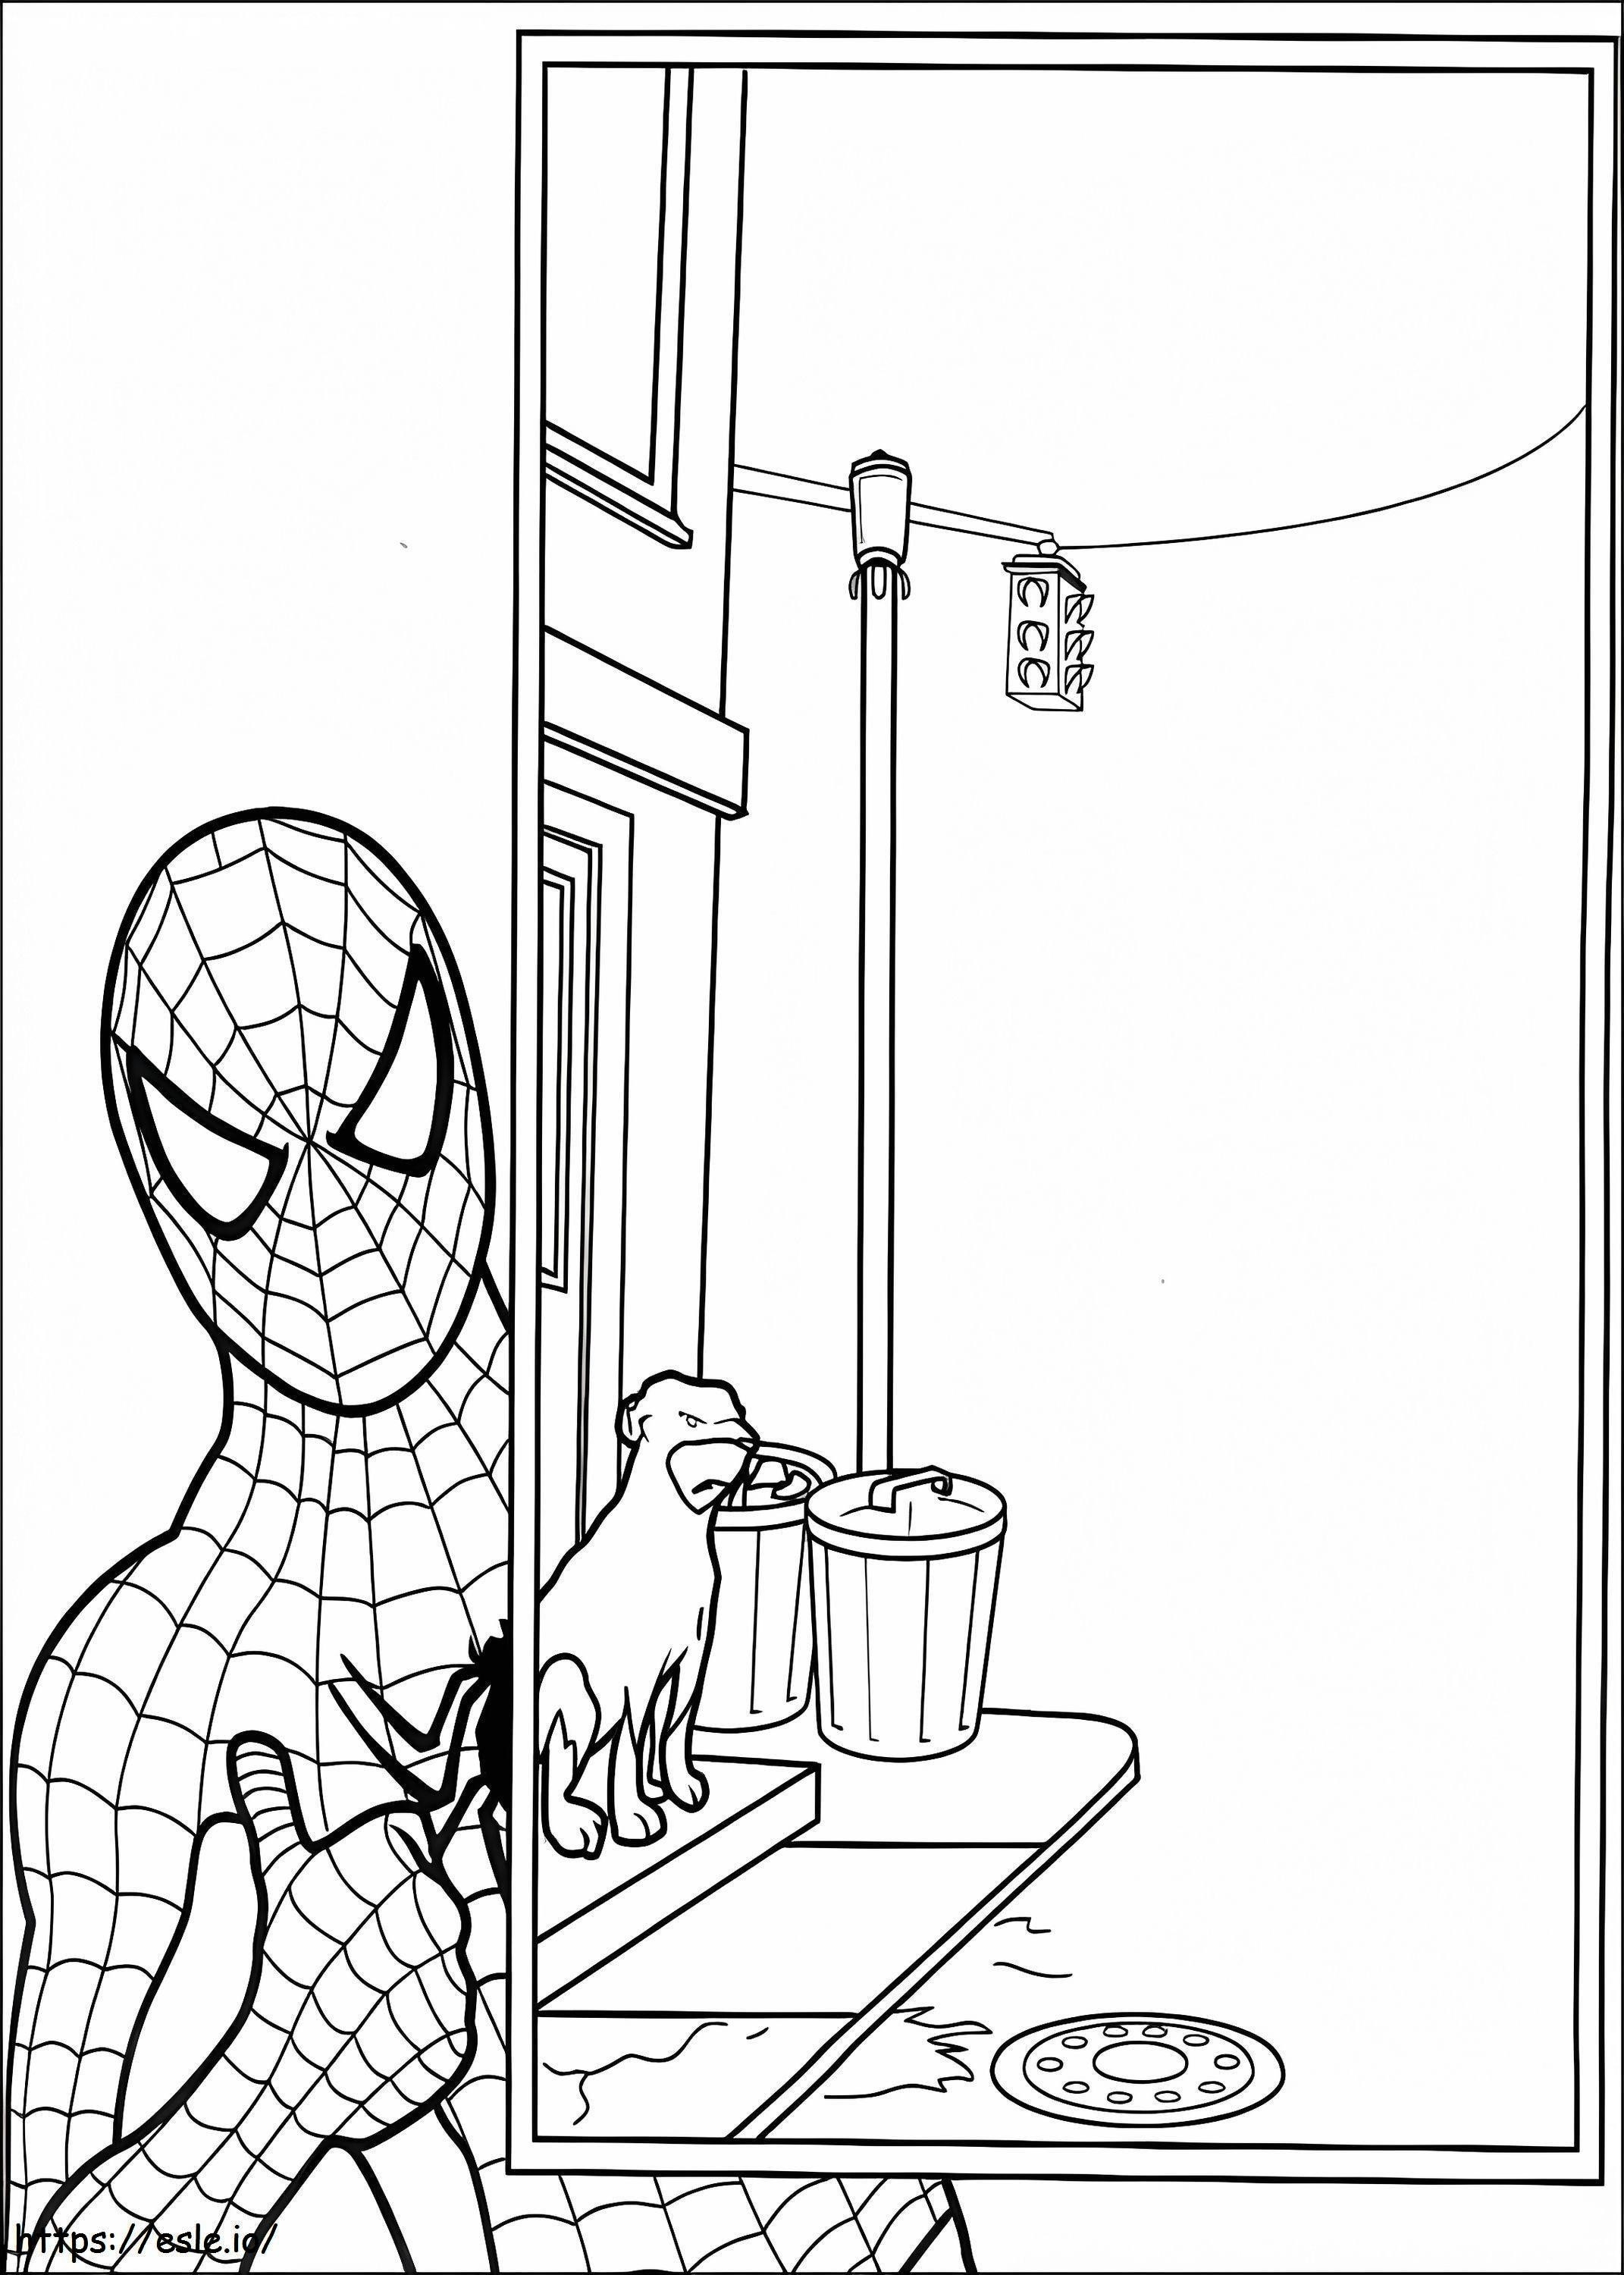 Funny Spiderman coloring page